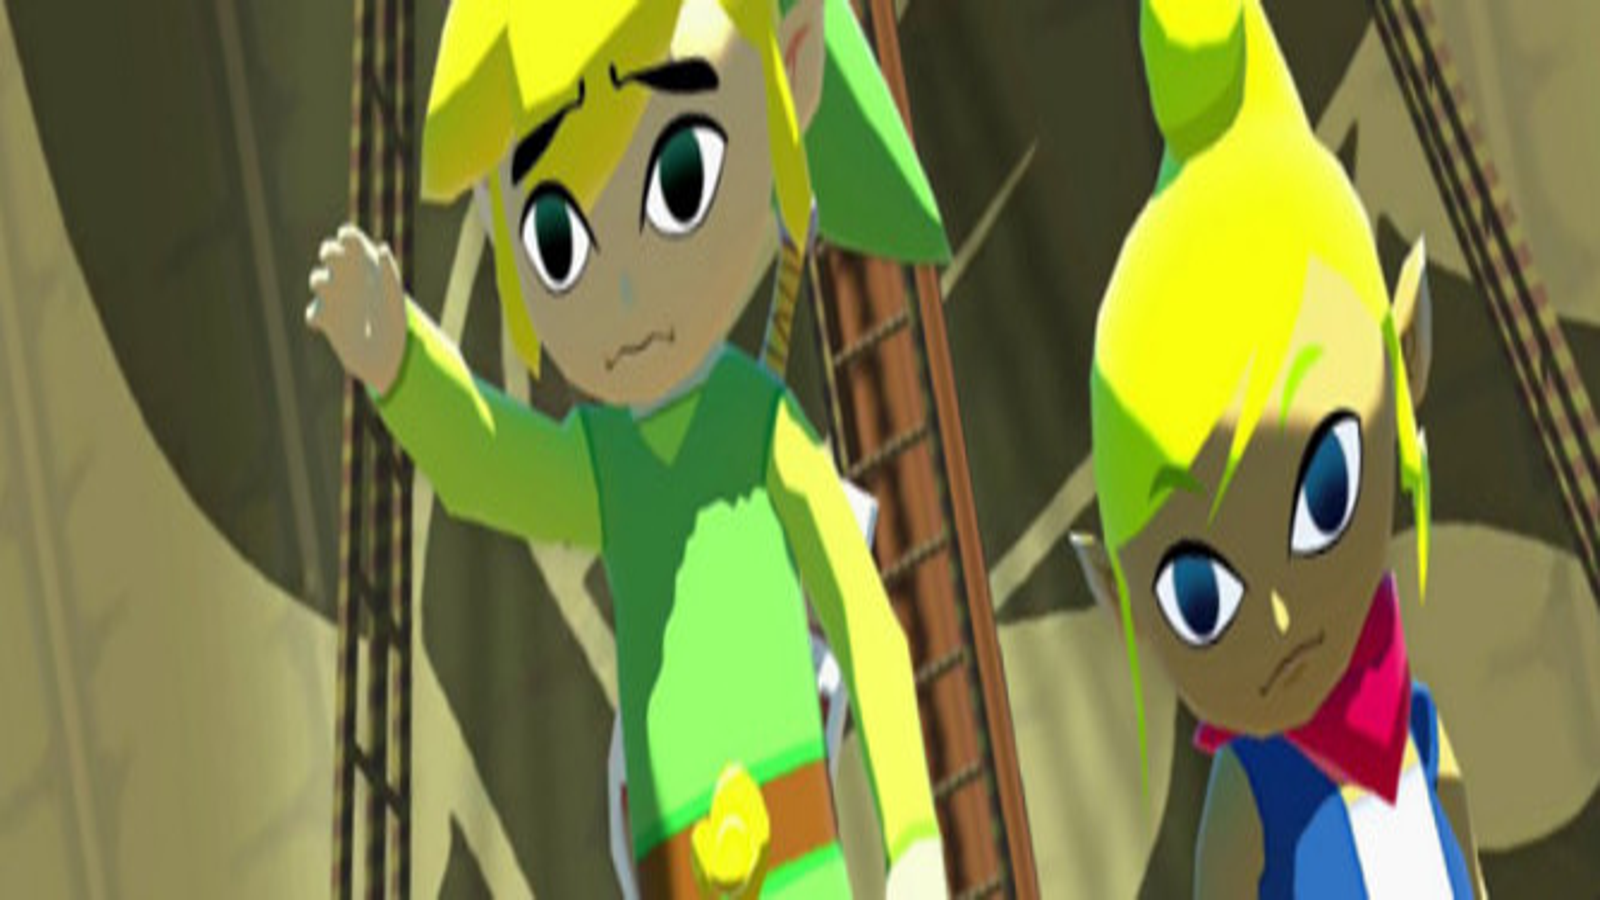 The Wind Waker REMIXED [The Legend of Zelda: The Wind Waker